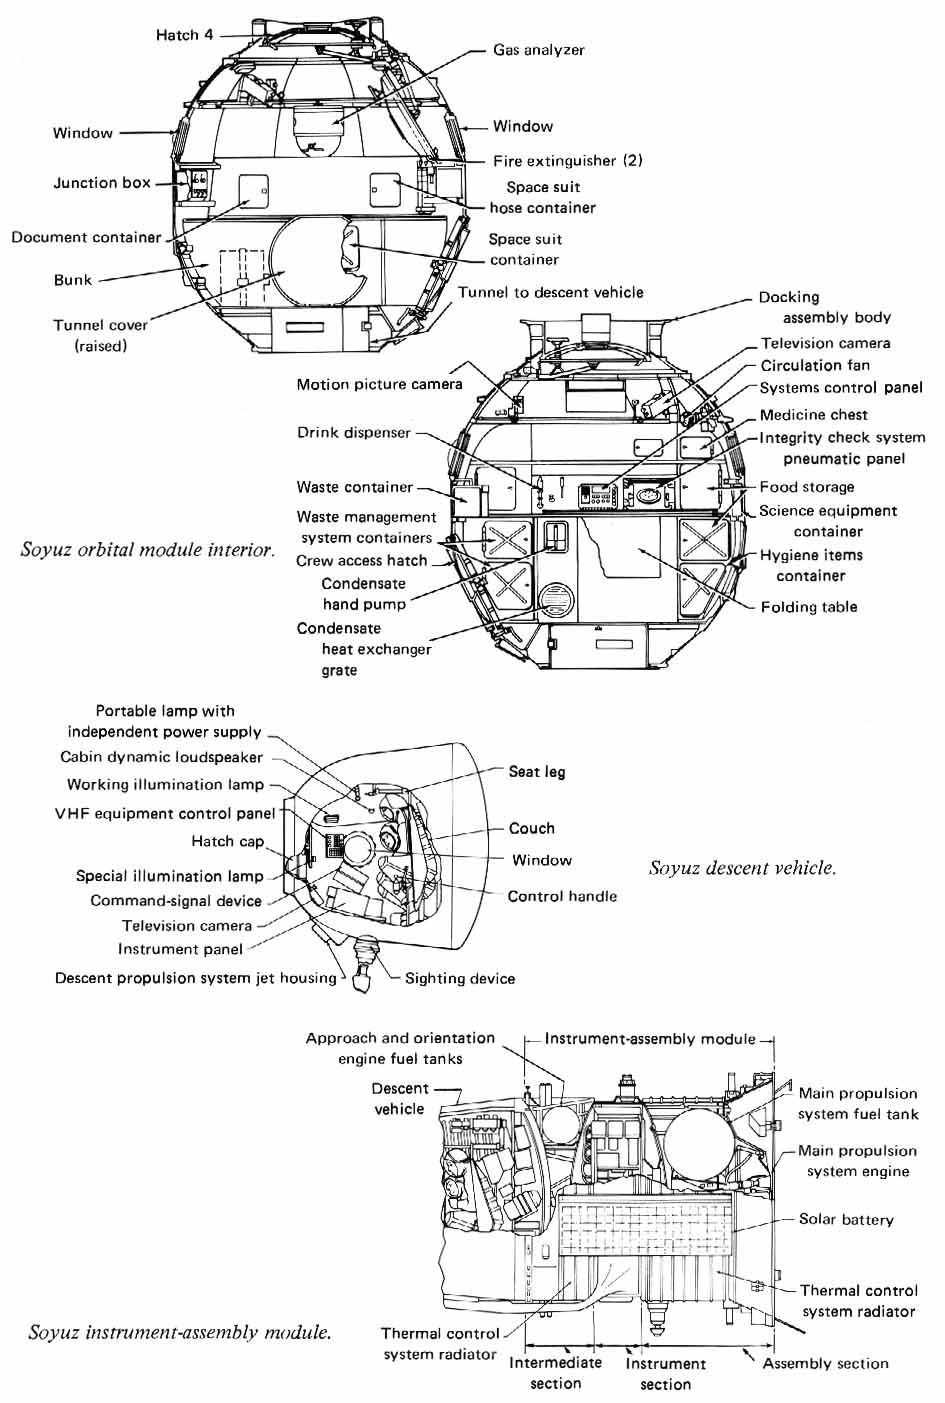 cross-sectional drawings of the Soyuz  Orbital Module, Descent vehicle and instrument-assembly  module